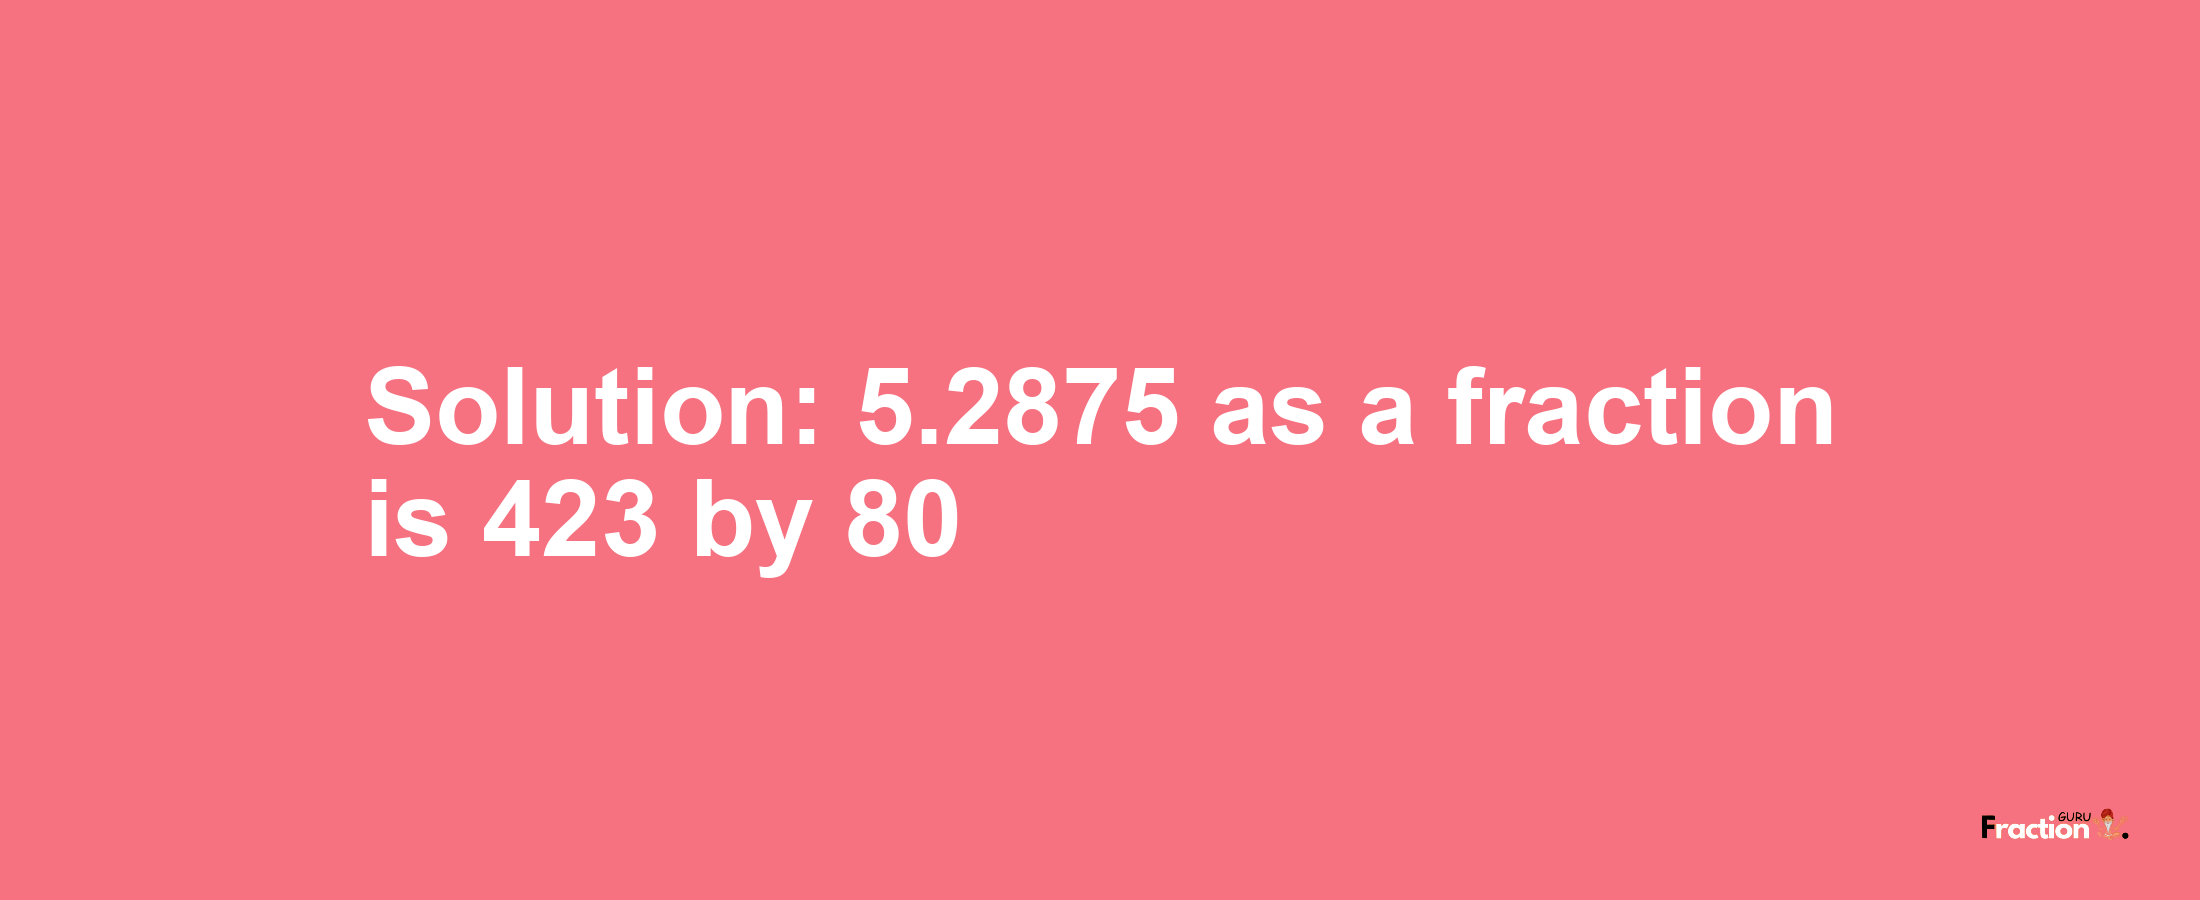 Solution:5.2875 as a fraction is 423/80